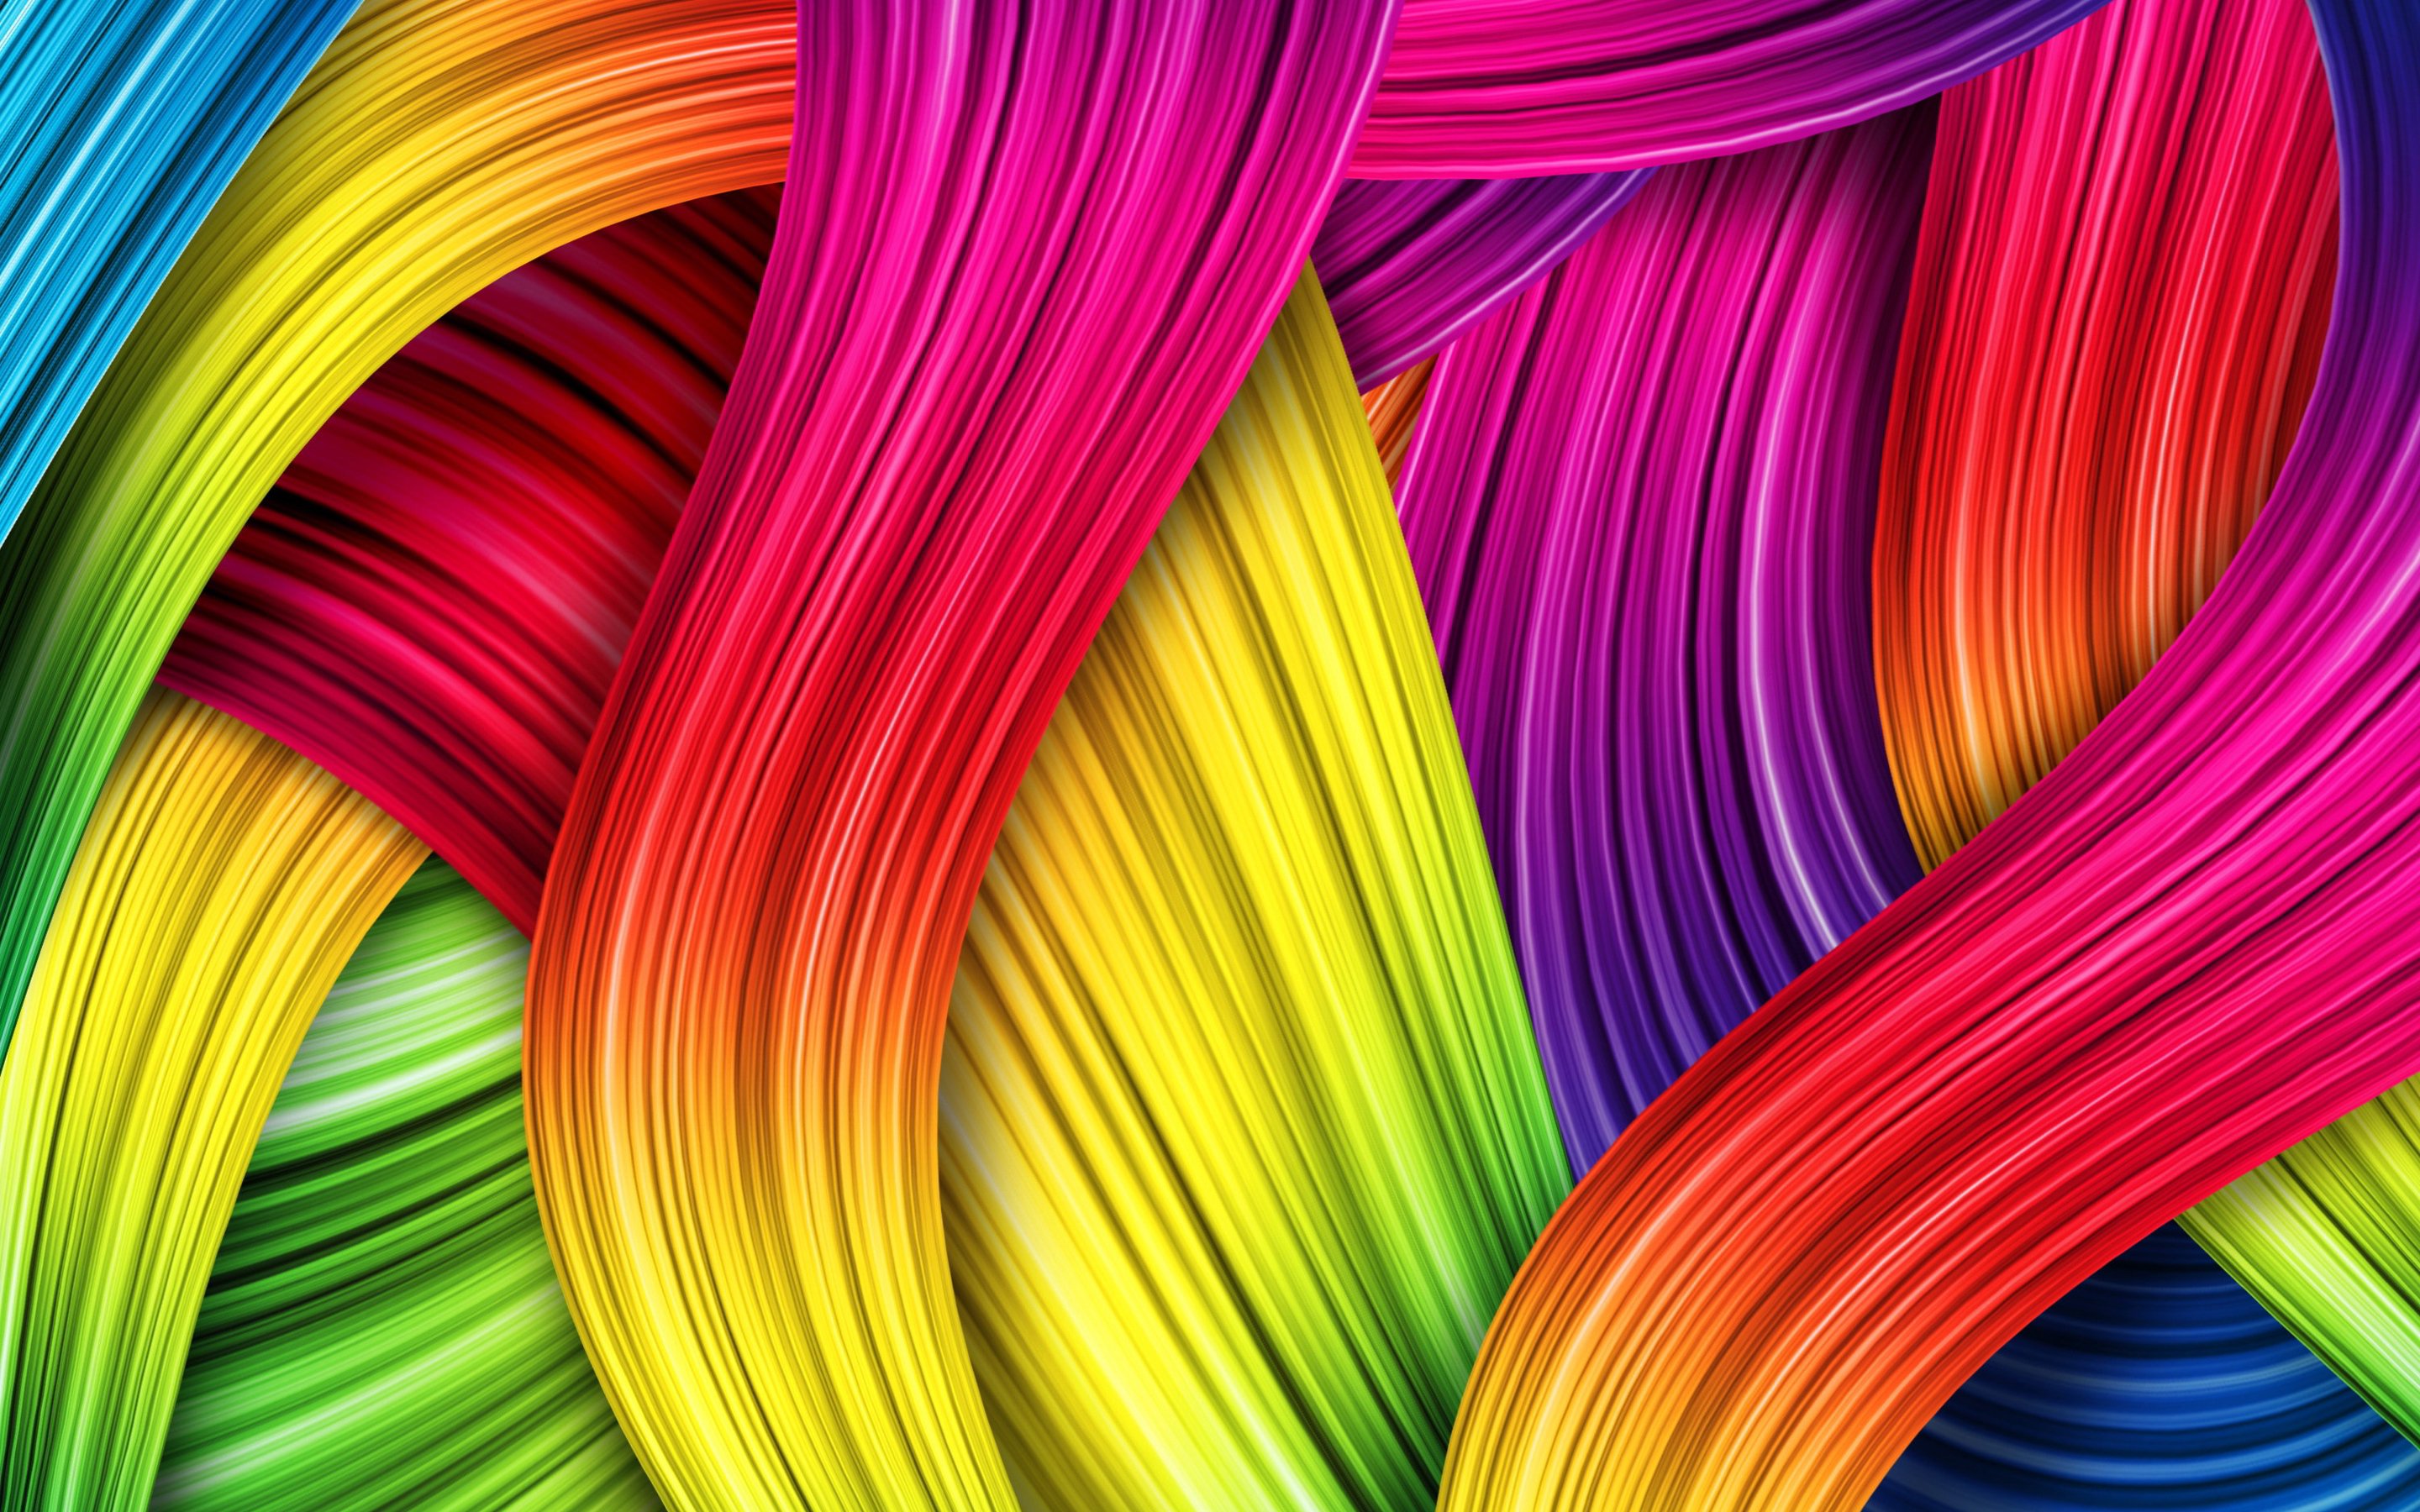 And Eye Popping QHD 1440p Wallpaper Specifically For Amoled Displays